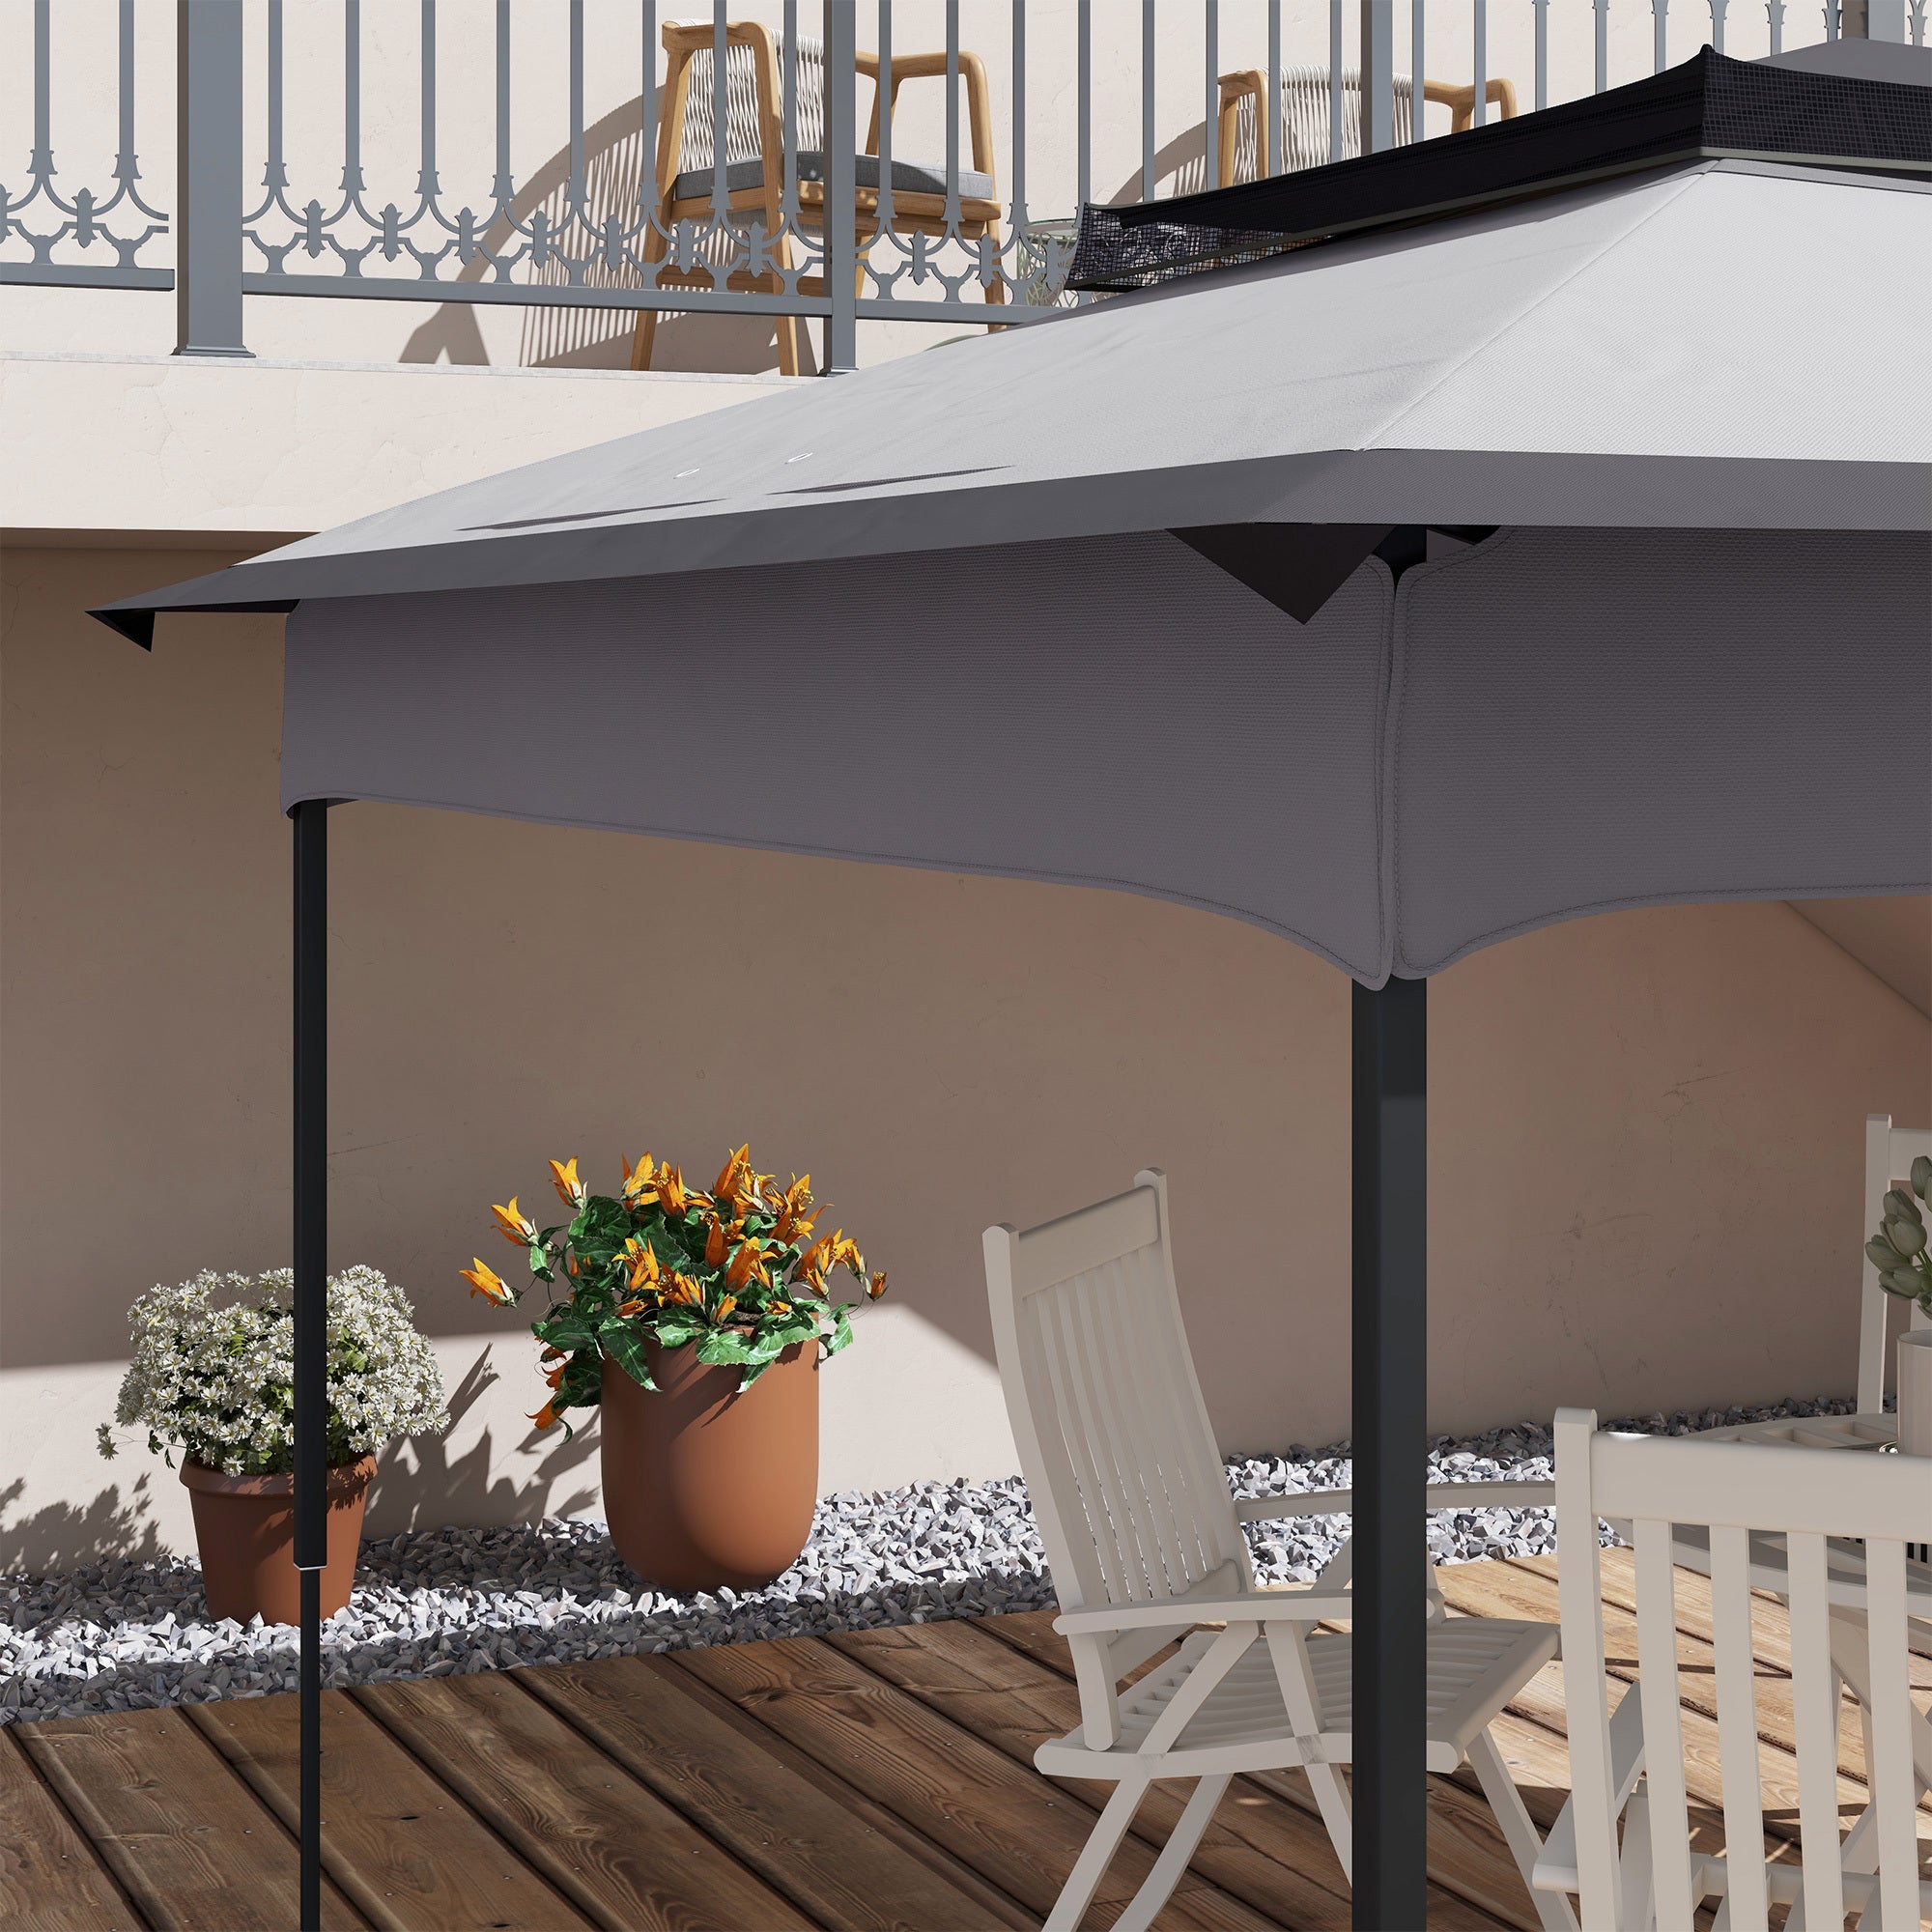 Outsunny 11' x 11' Pop up Canopy Top Replacement gray-oxford fabric